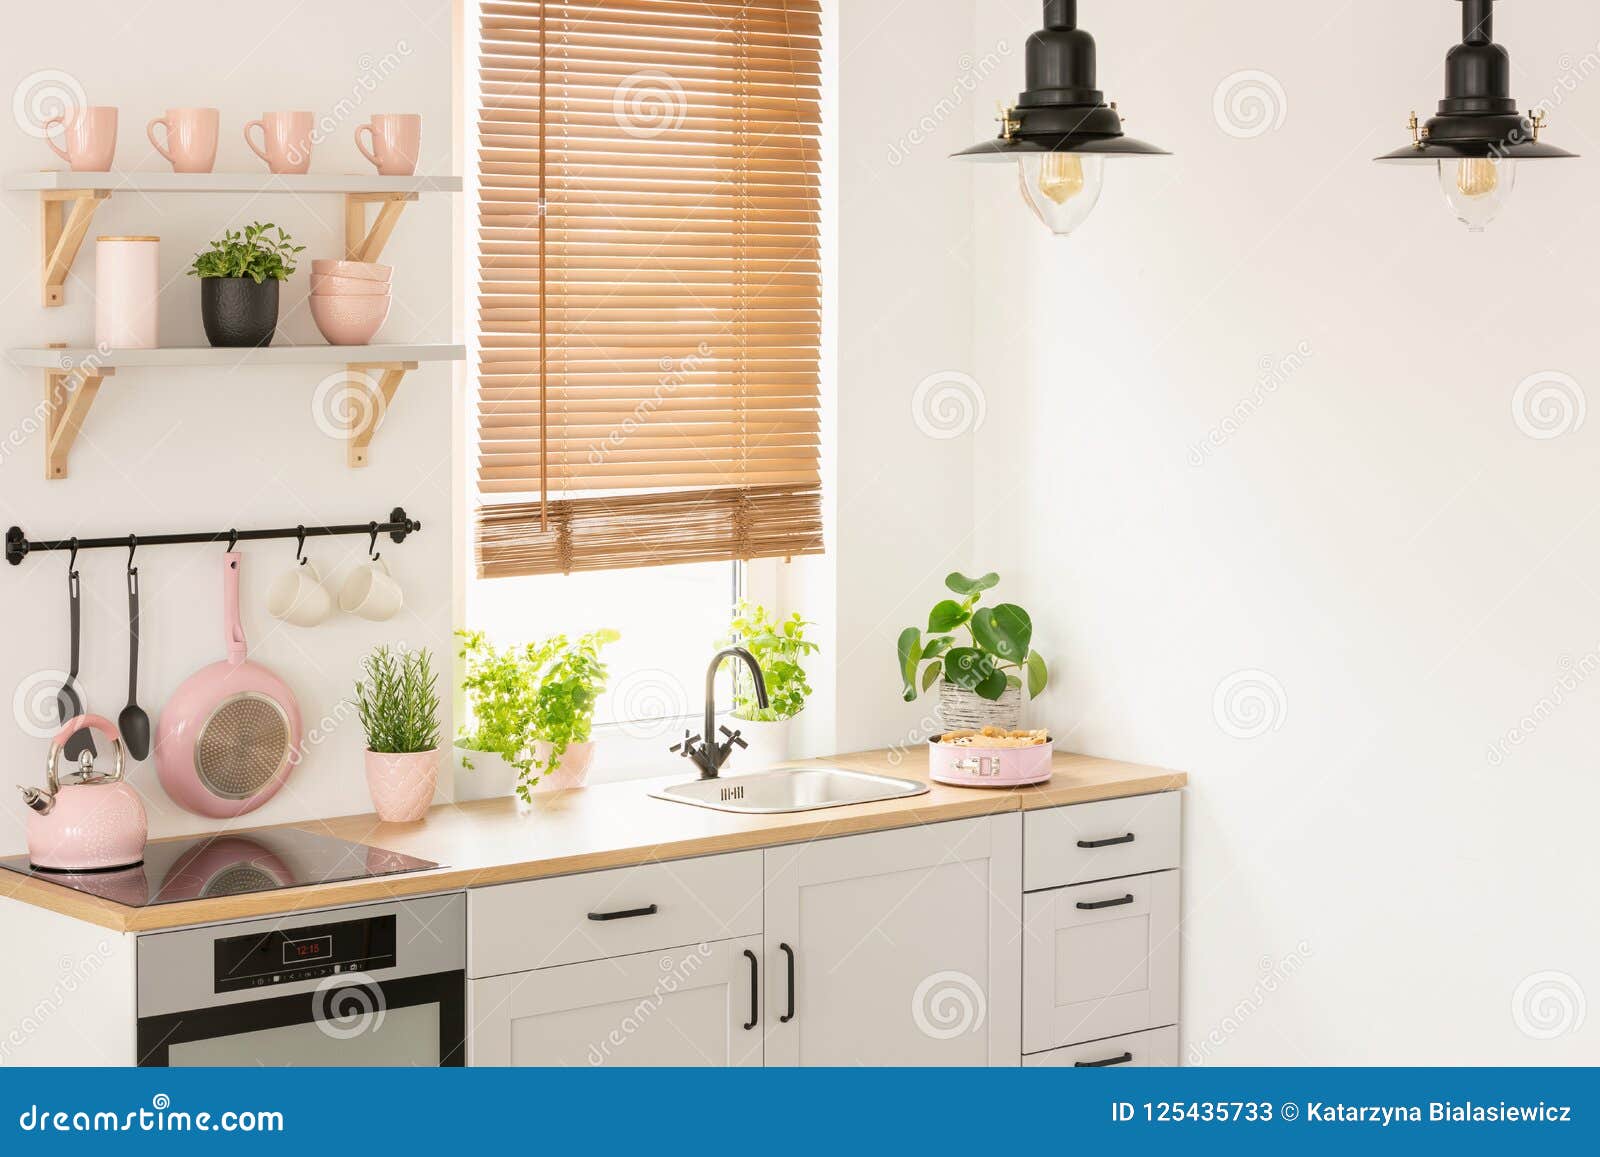 plants on wooden countertop in kitchen interior with blinds, lam